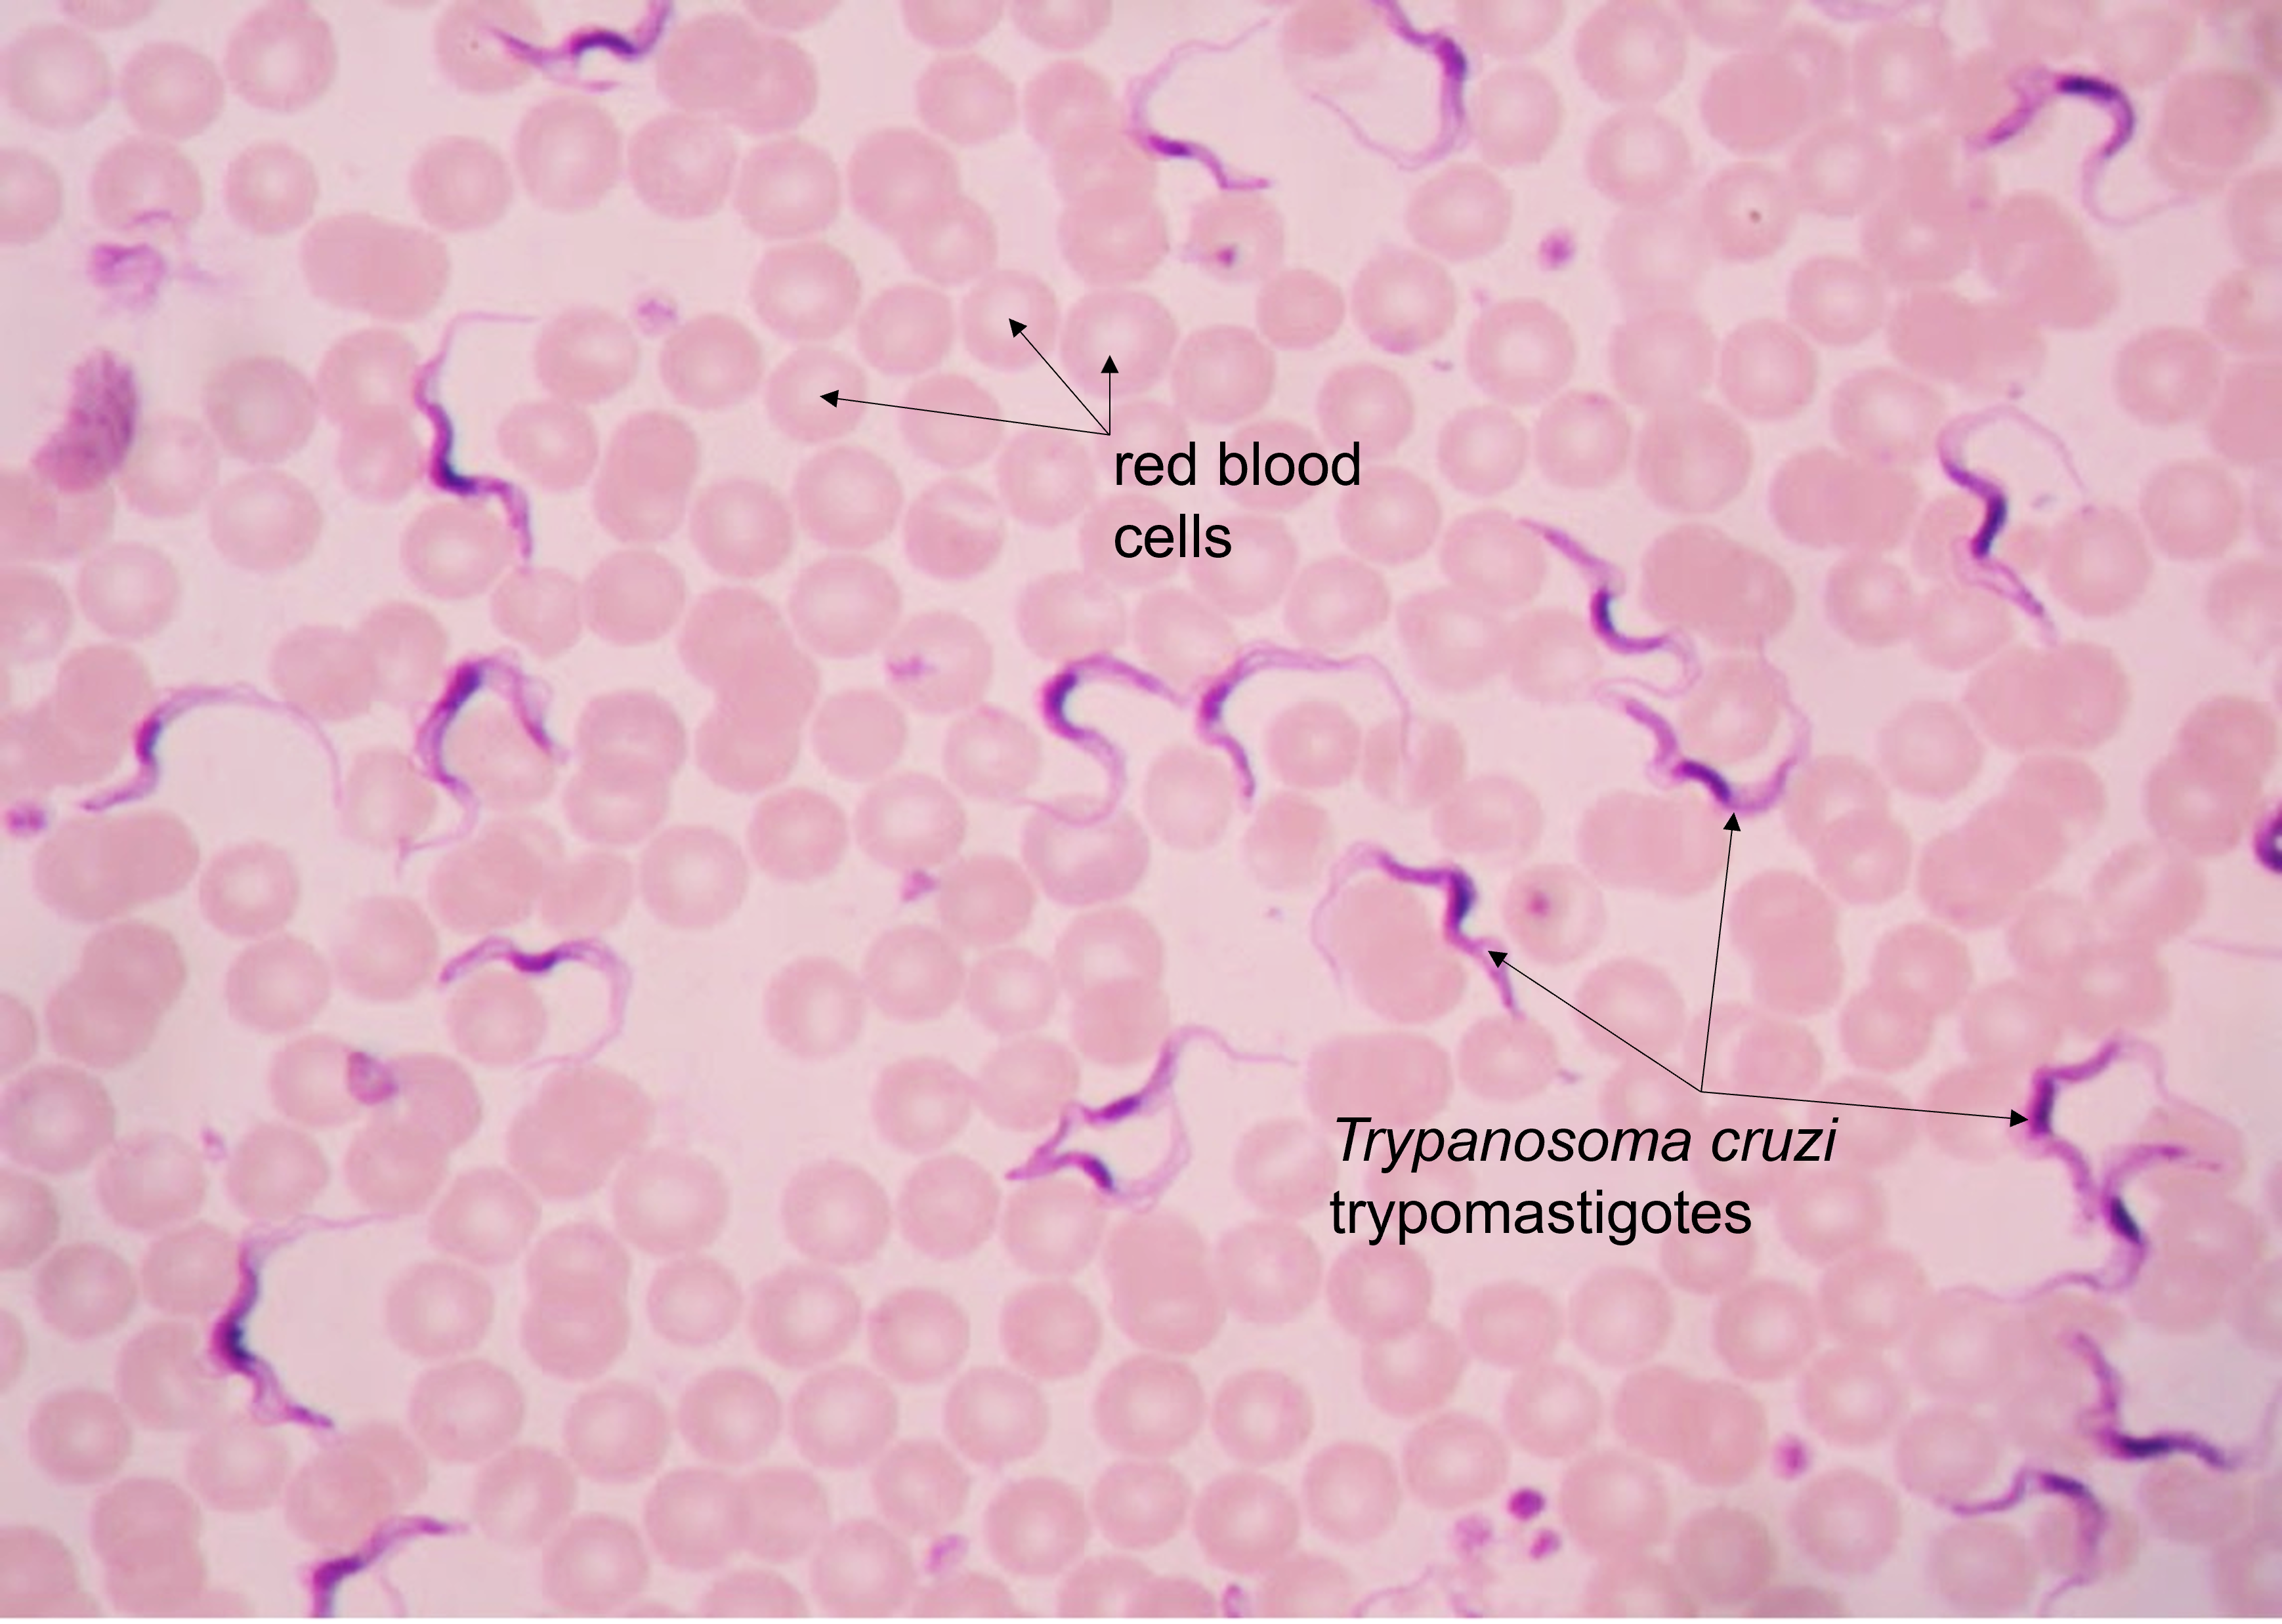 Trypanosoma in blood smear labeled